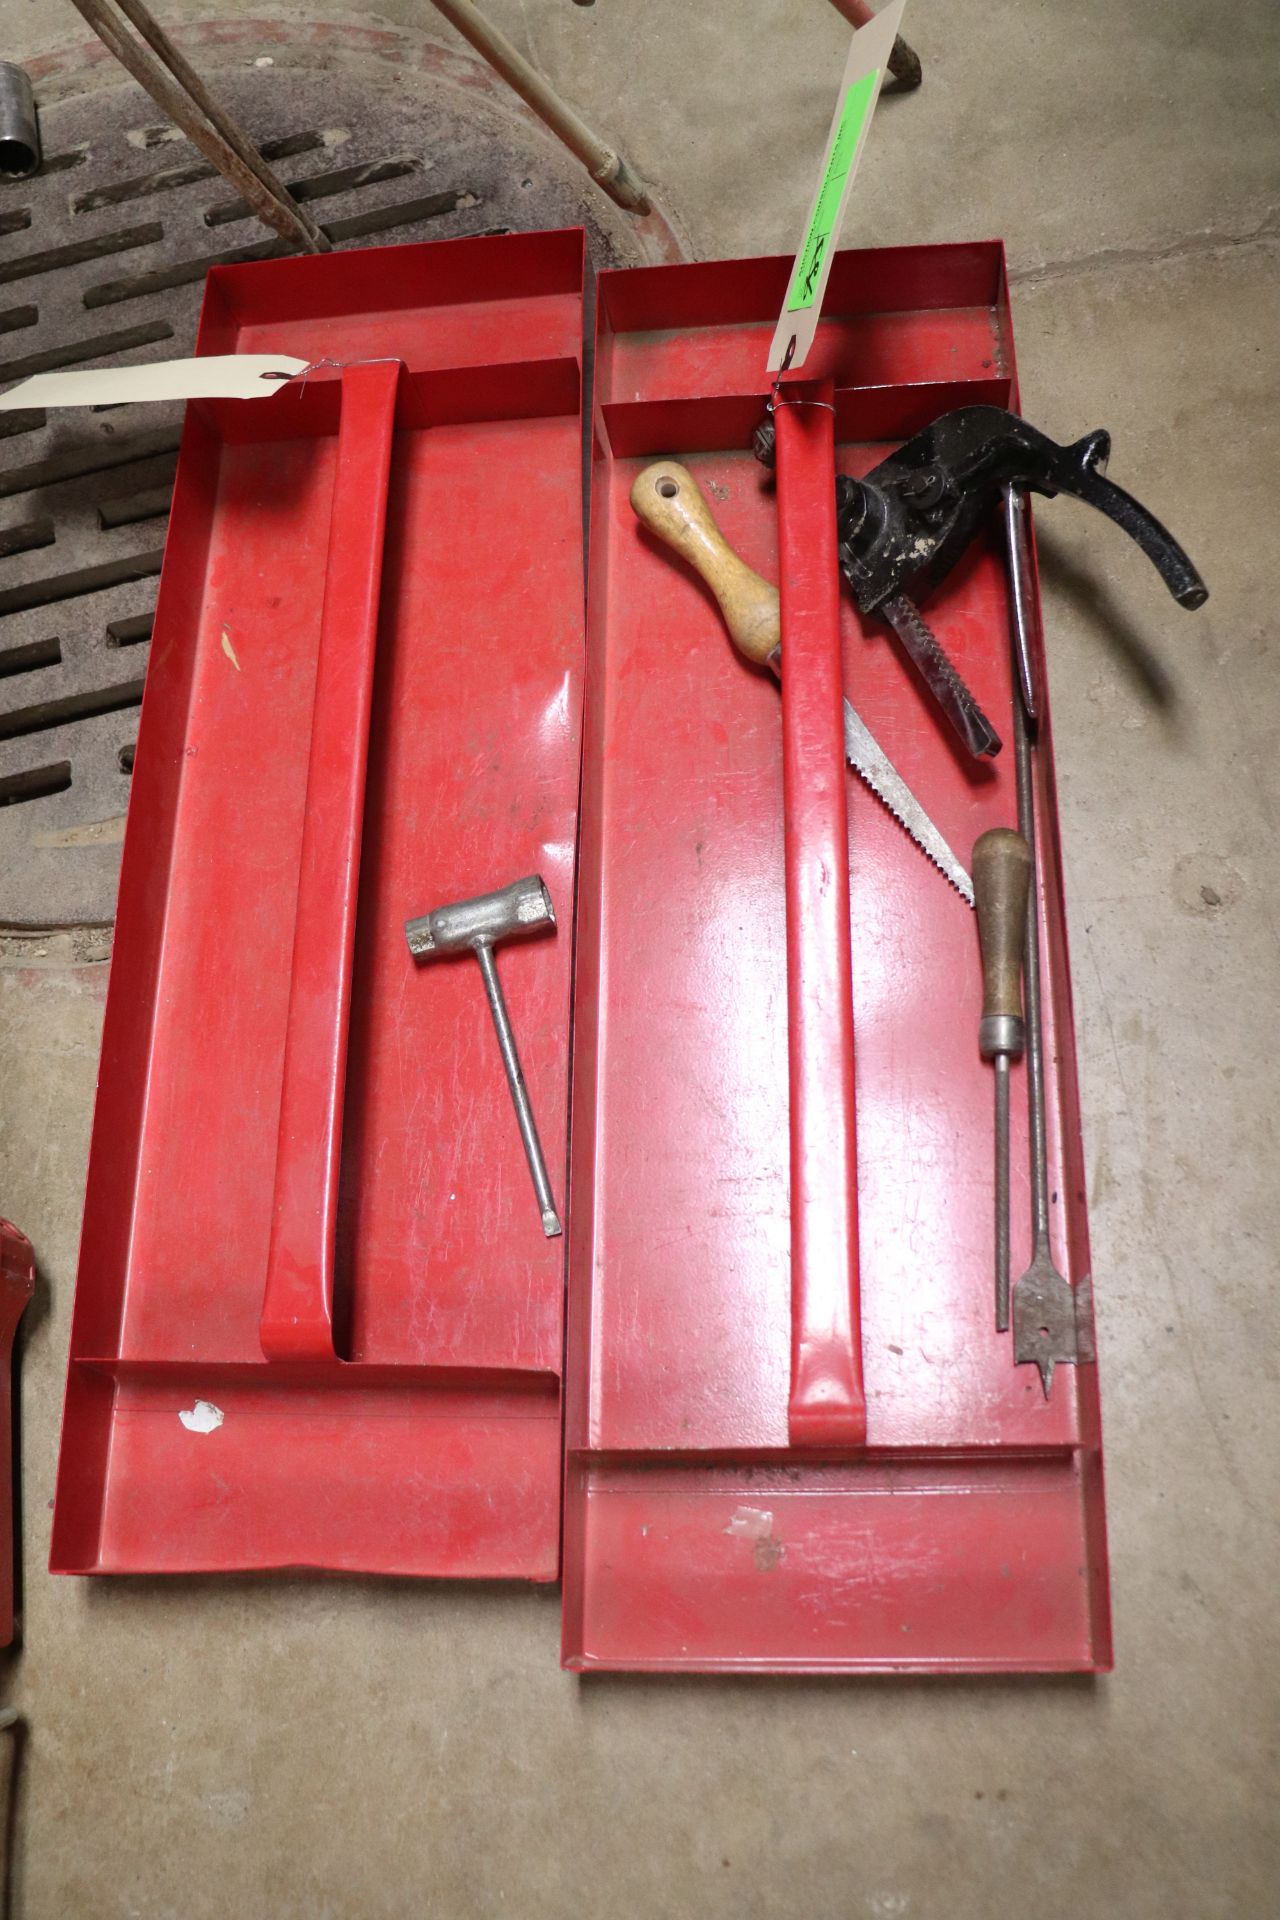 Set of toolbox trays and accessories